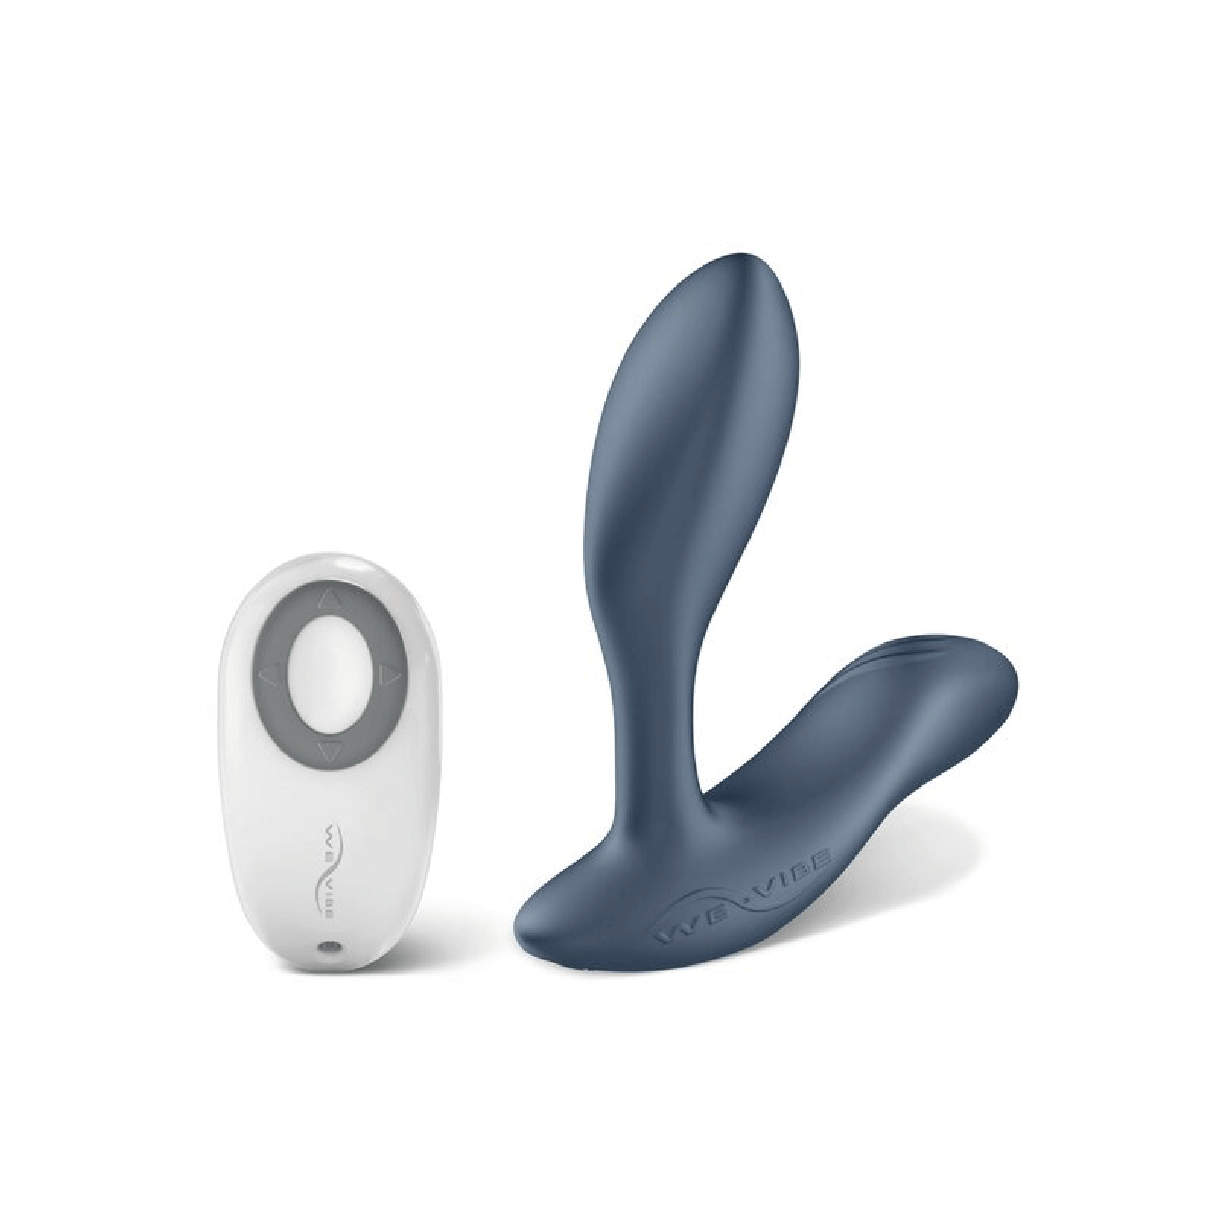 The vibrating prostate massager Vector by We-Vibe - Product image